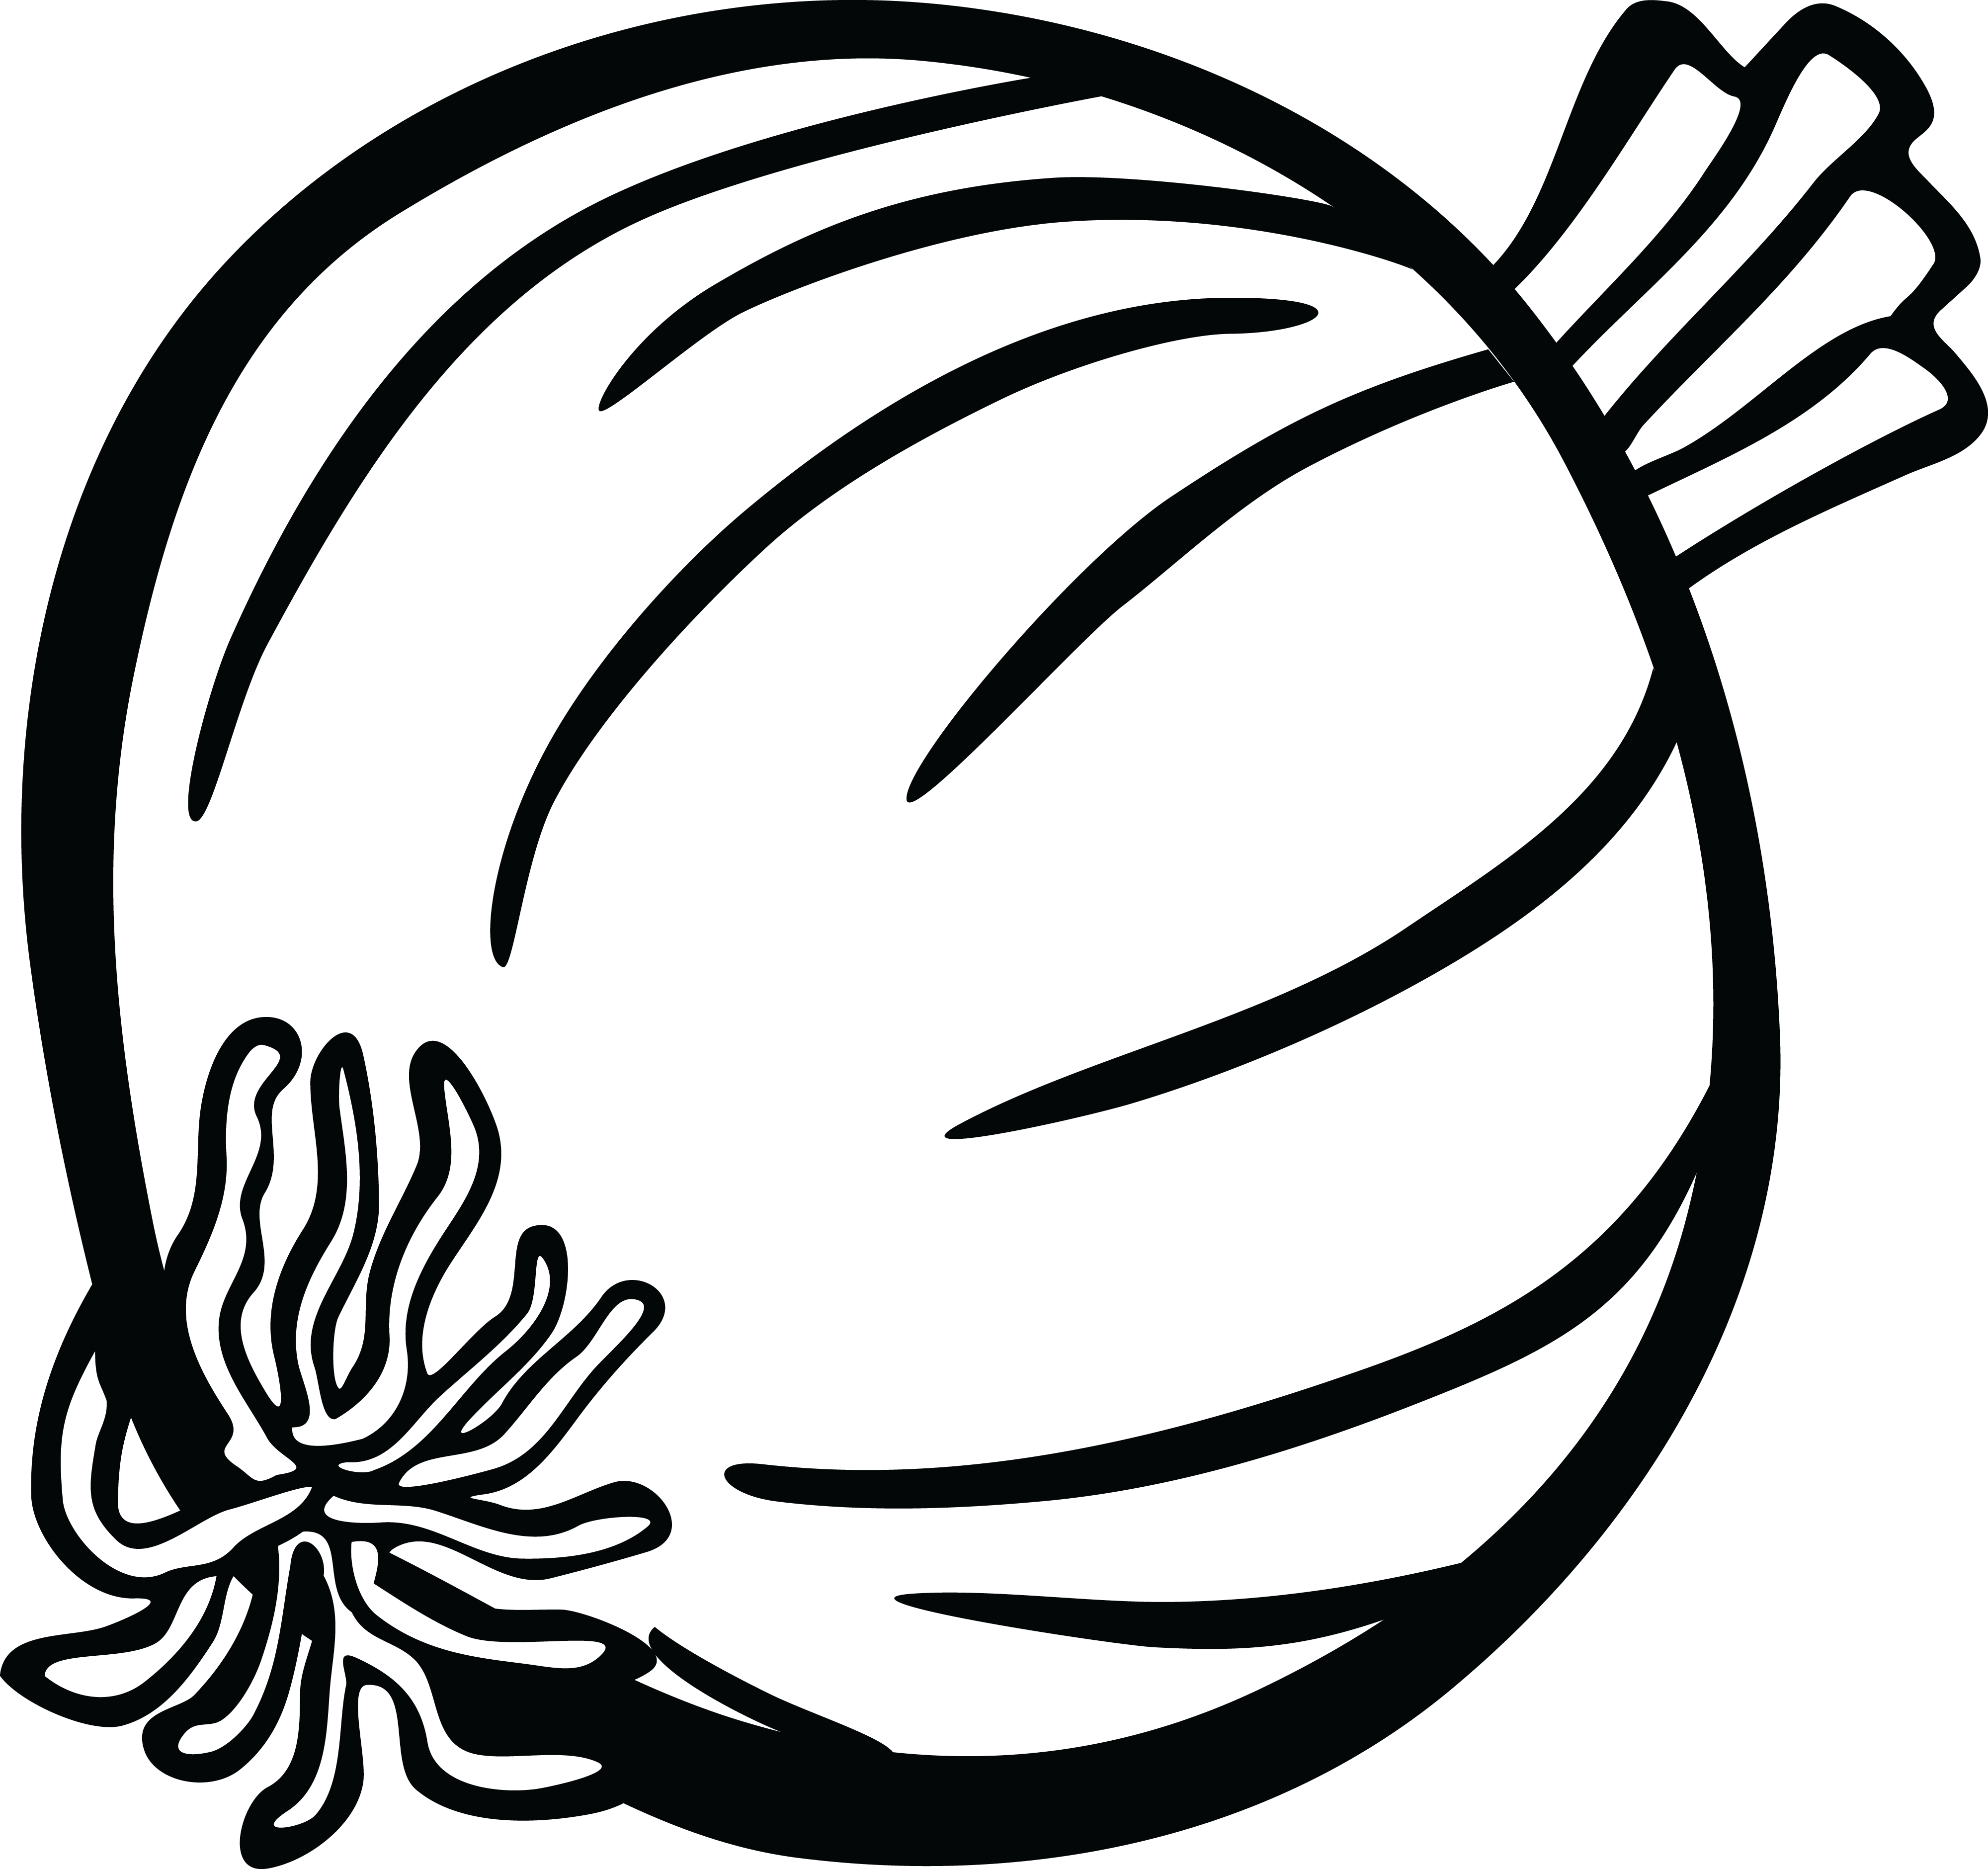 clipart of onion - photo #36